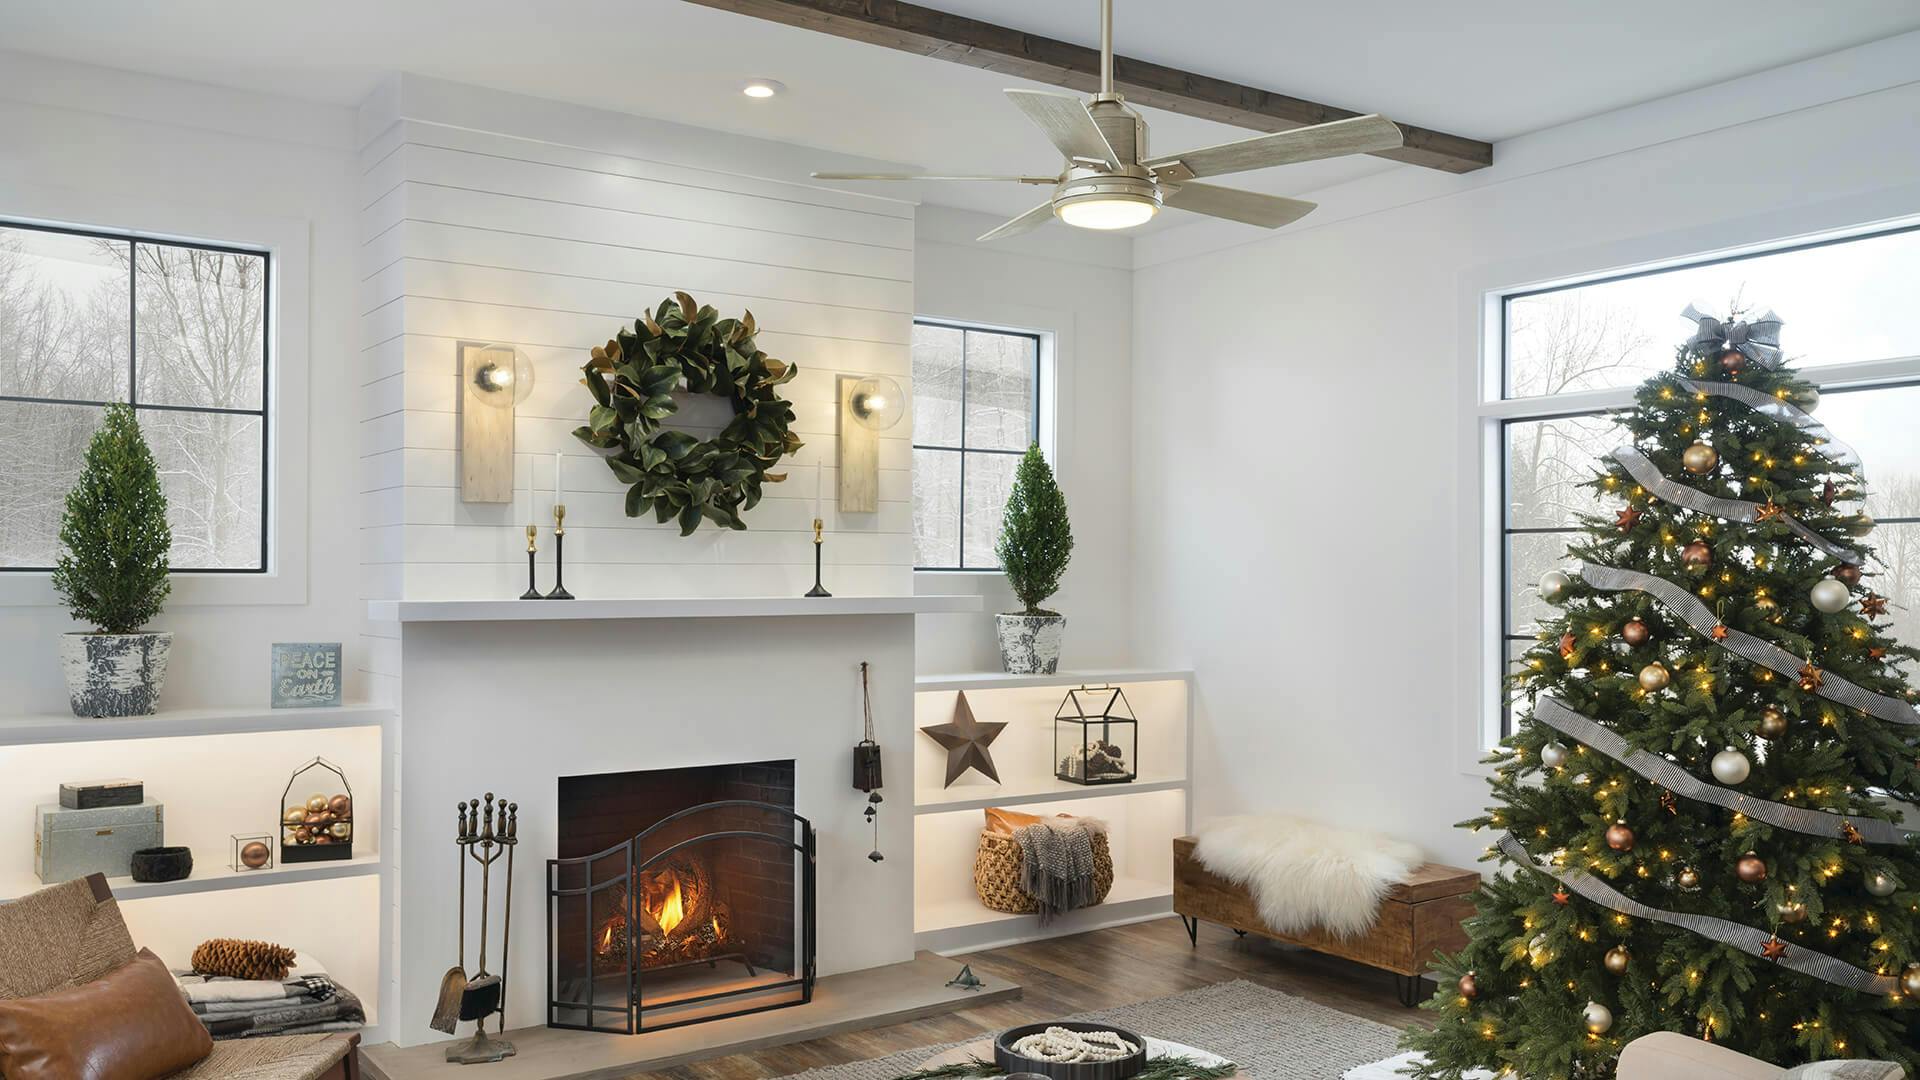 Living room during the day with holiday decor including a Christmas tree and wreath over a lit fireplace